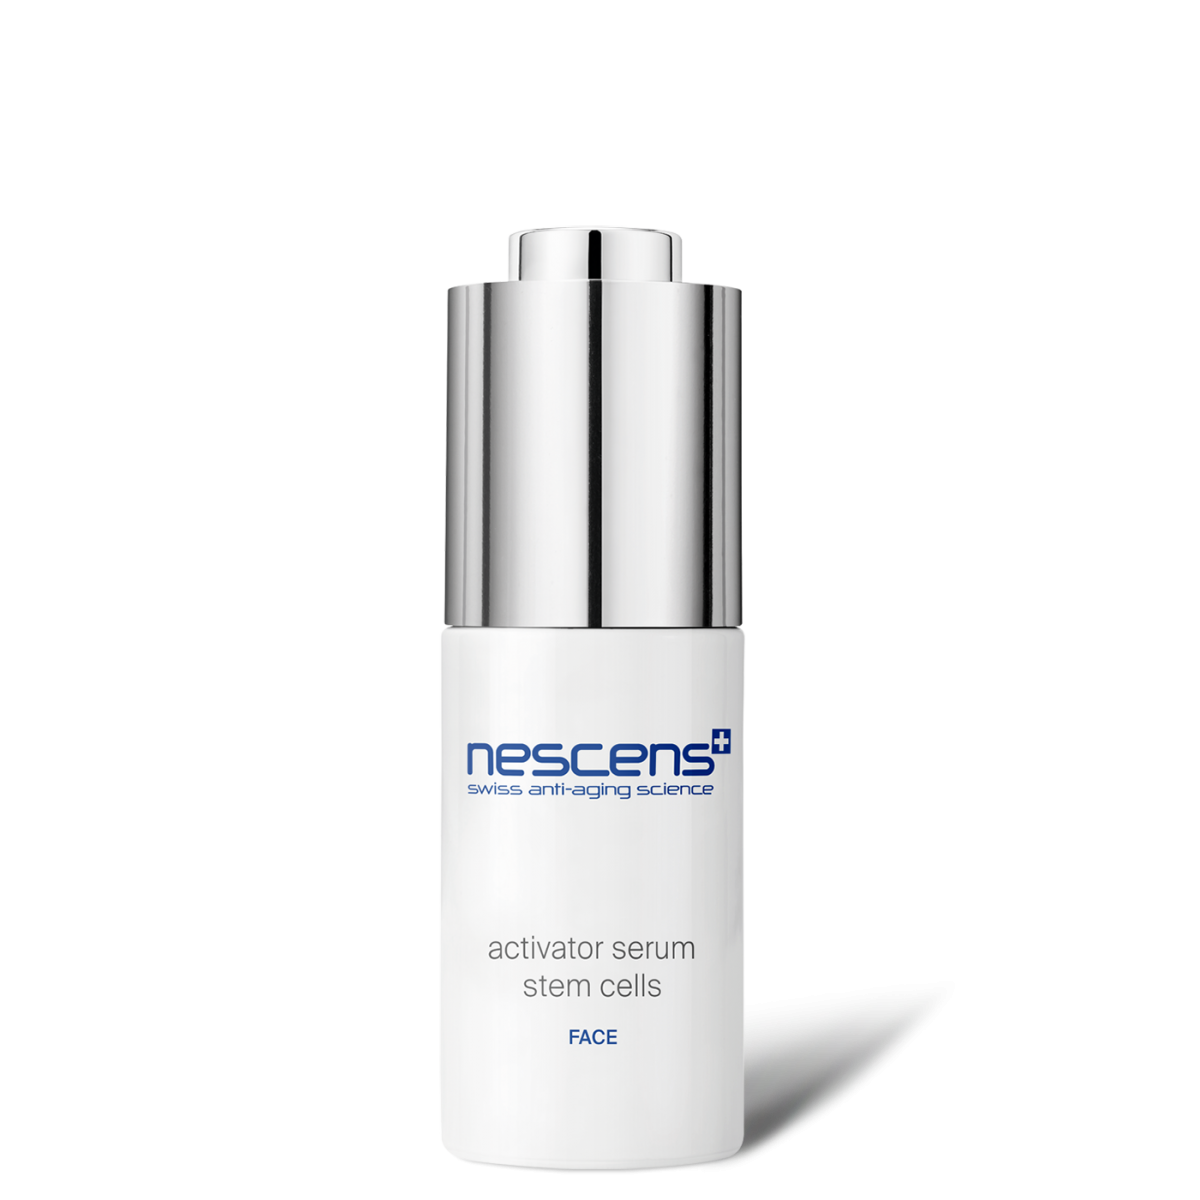 The Stem Cell Activator Serum ensures an obvious lifting effect, skin texture is refined and the complexion is more even - NS132